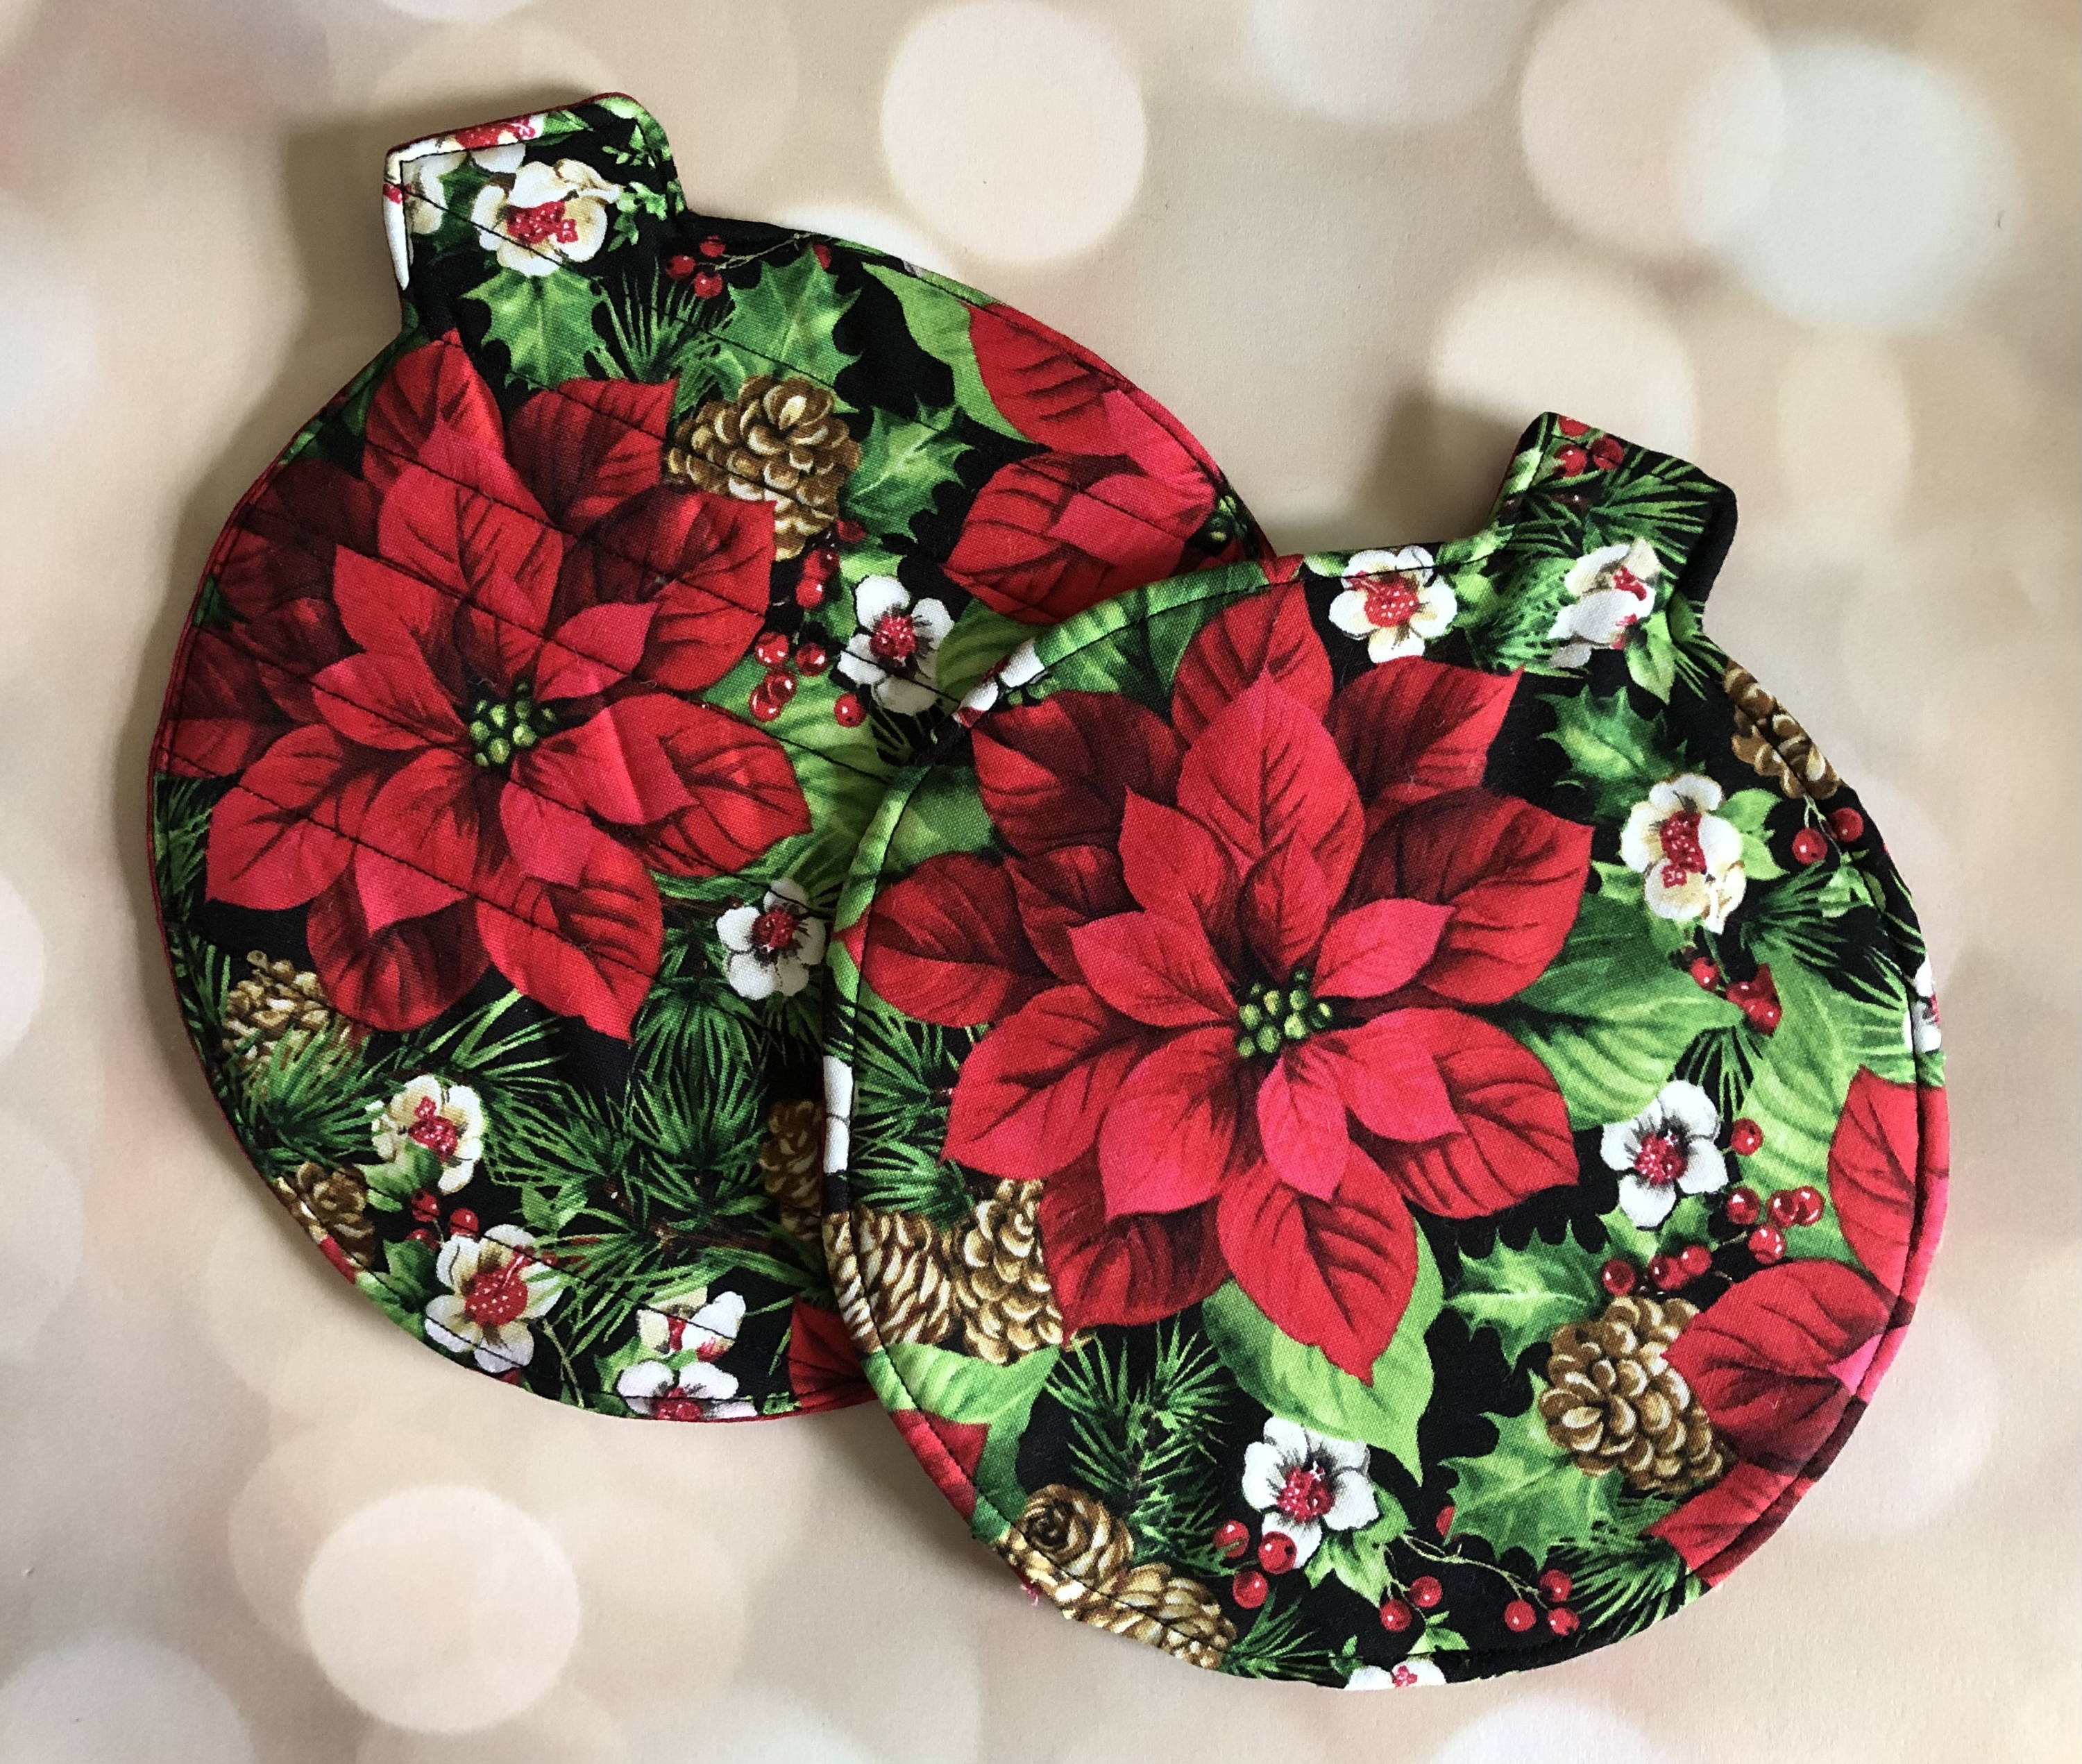 Christmas bulb template used for sewing hot pads